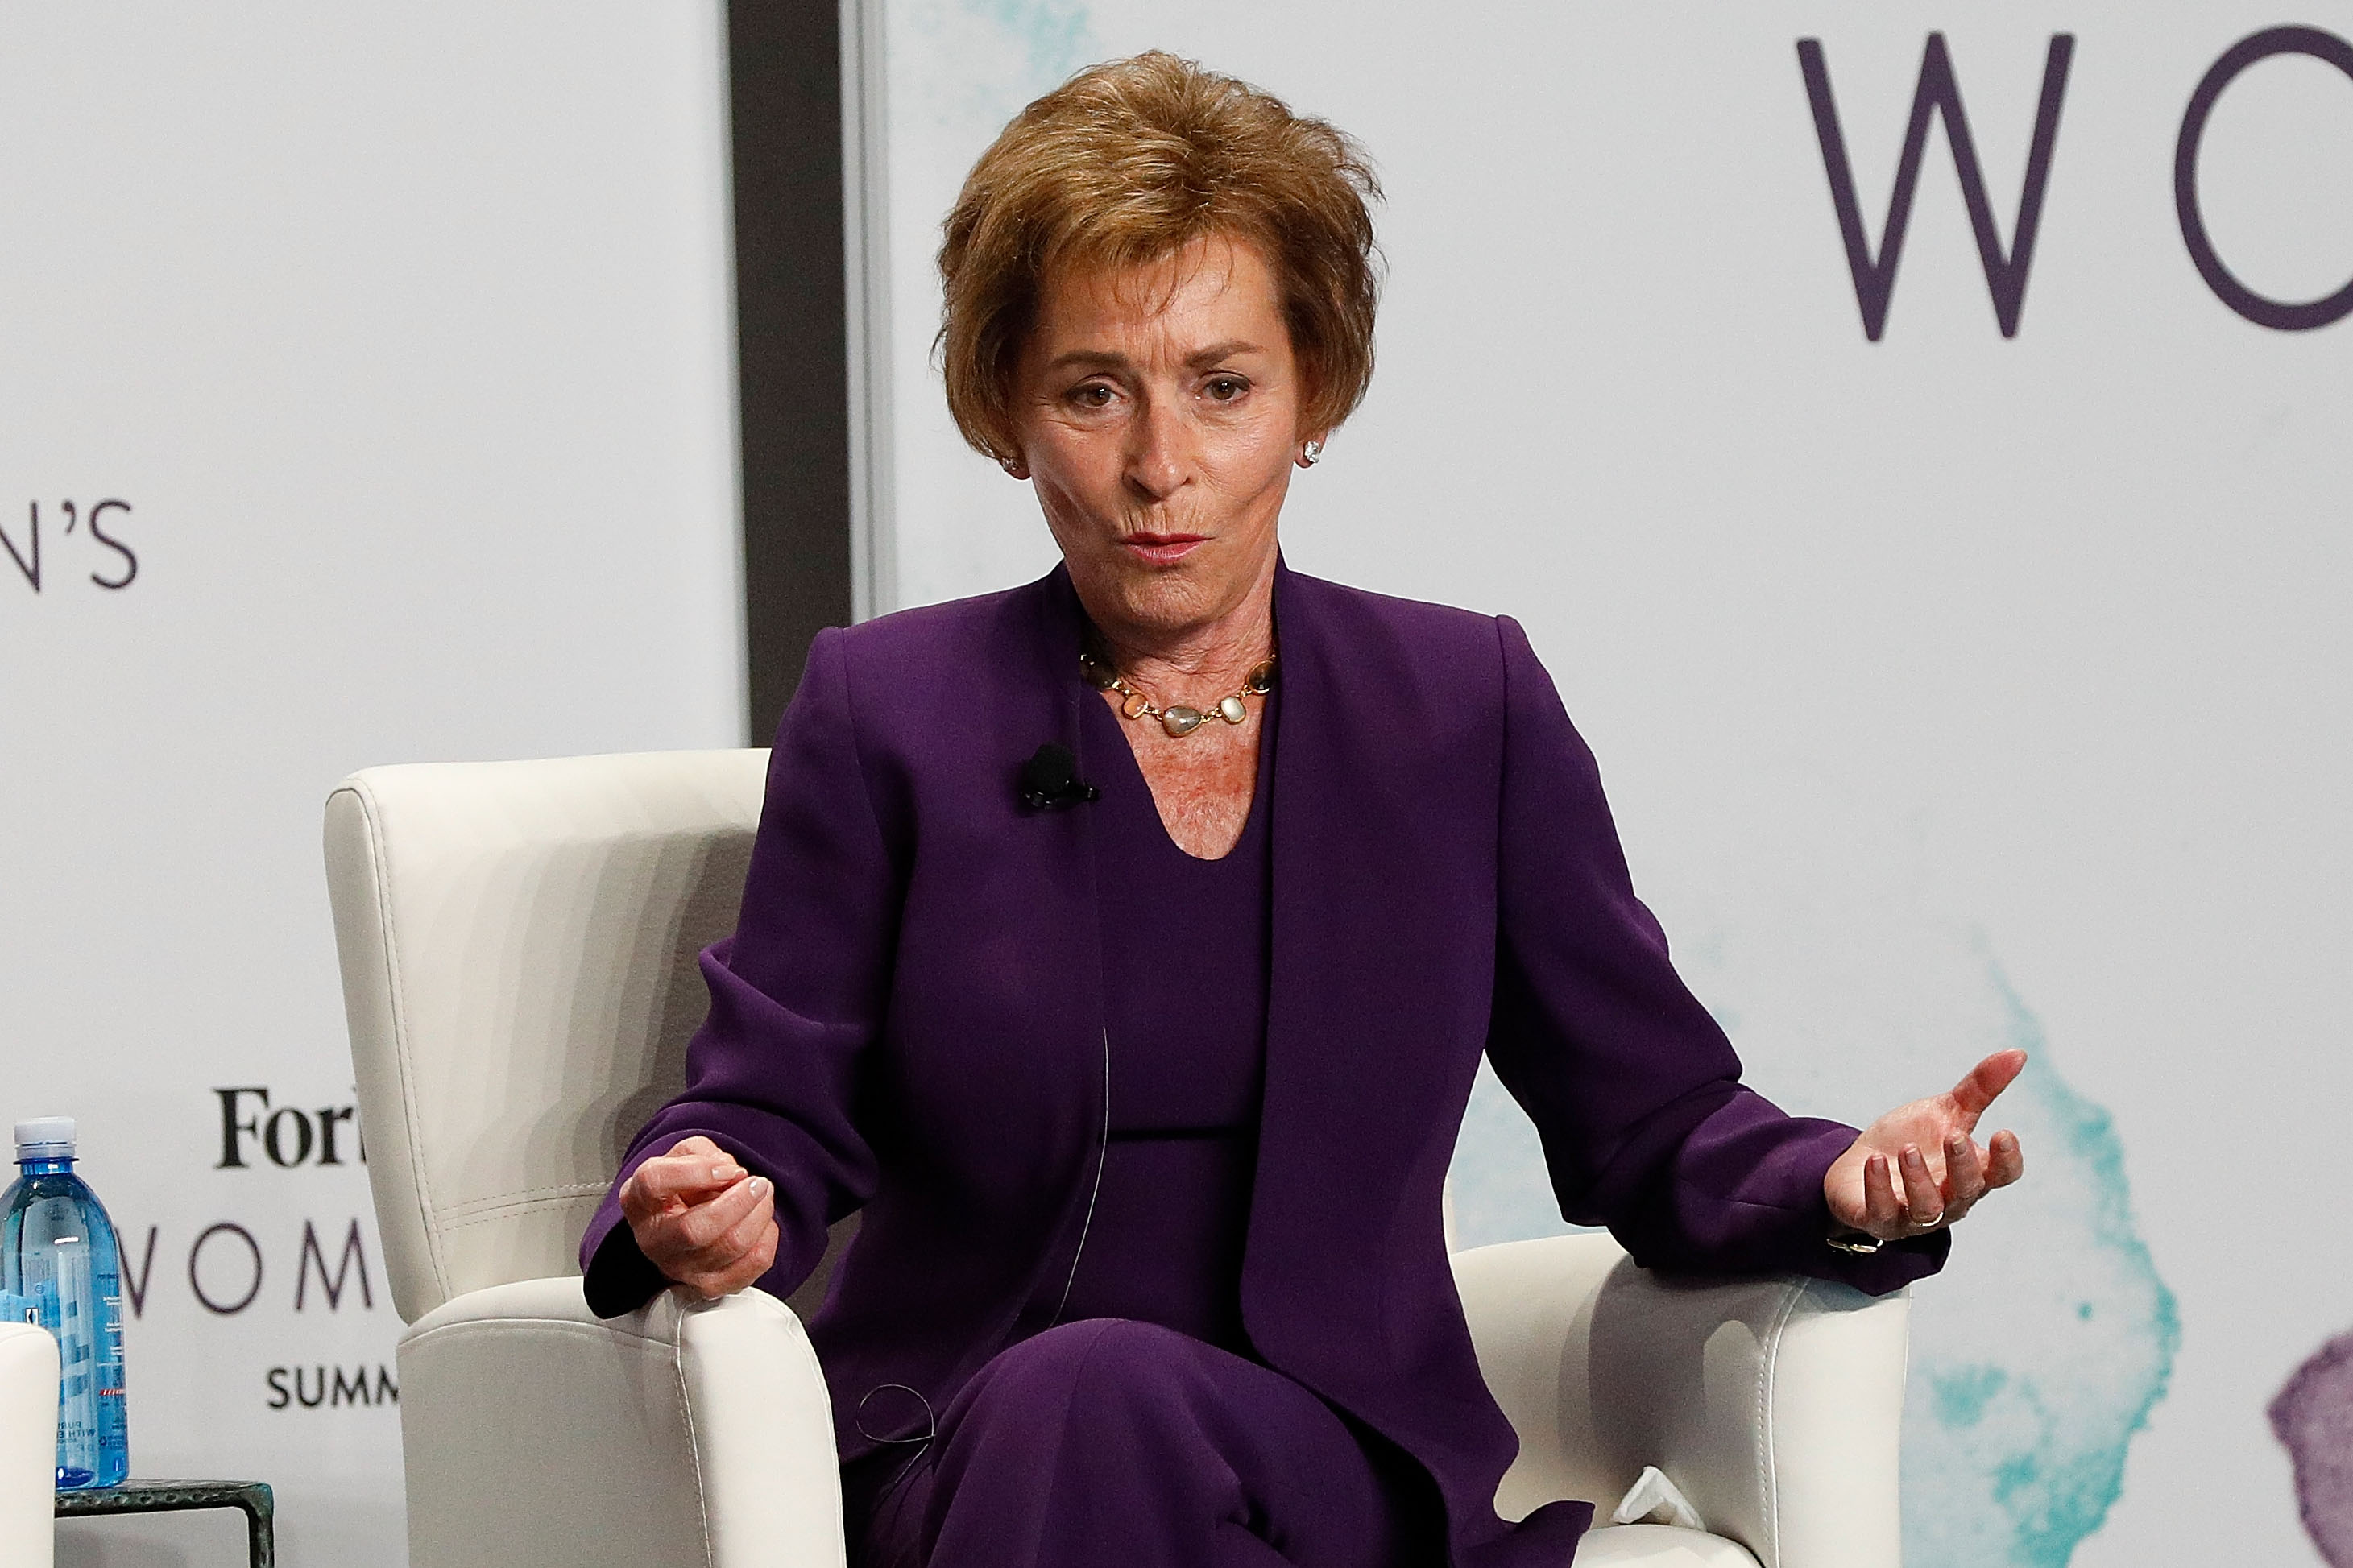 Judge Judy speaks during the 2017 Forbes Women's Summit at Spring Studios on June 13, 2017 in New York City | Photo: Getty Images